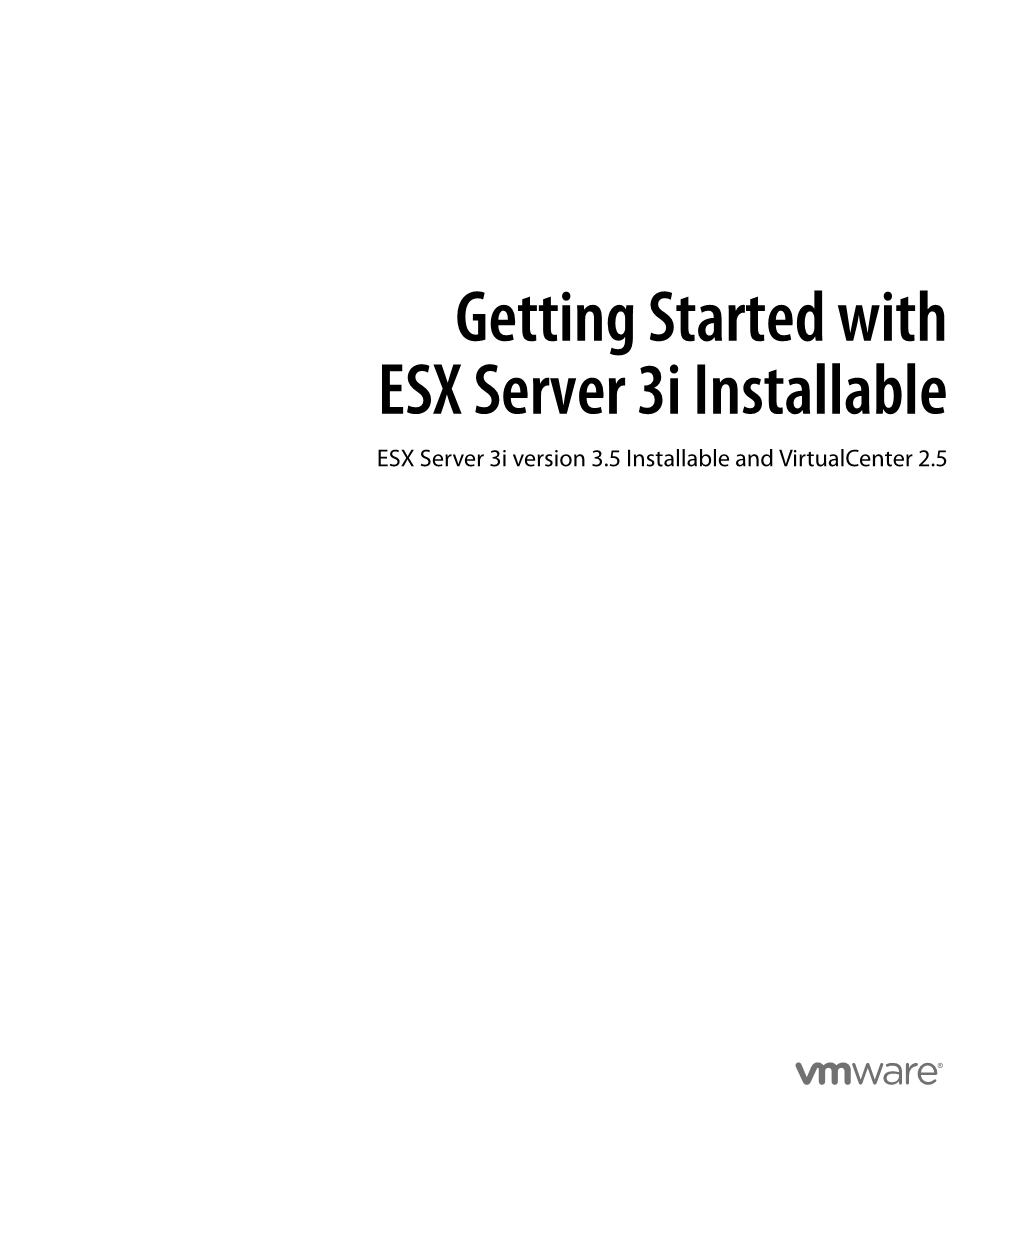 Getting Started with ESX Server 3I Installable ESX Server 3I Version 3.5 Installable and Virtualcenter 2.5 Getting Started with ESX Server 3I Installable